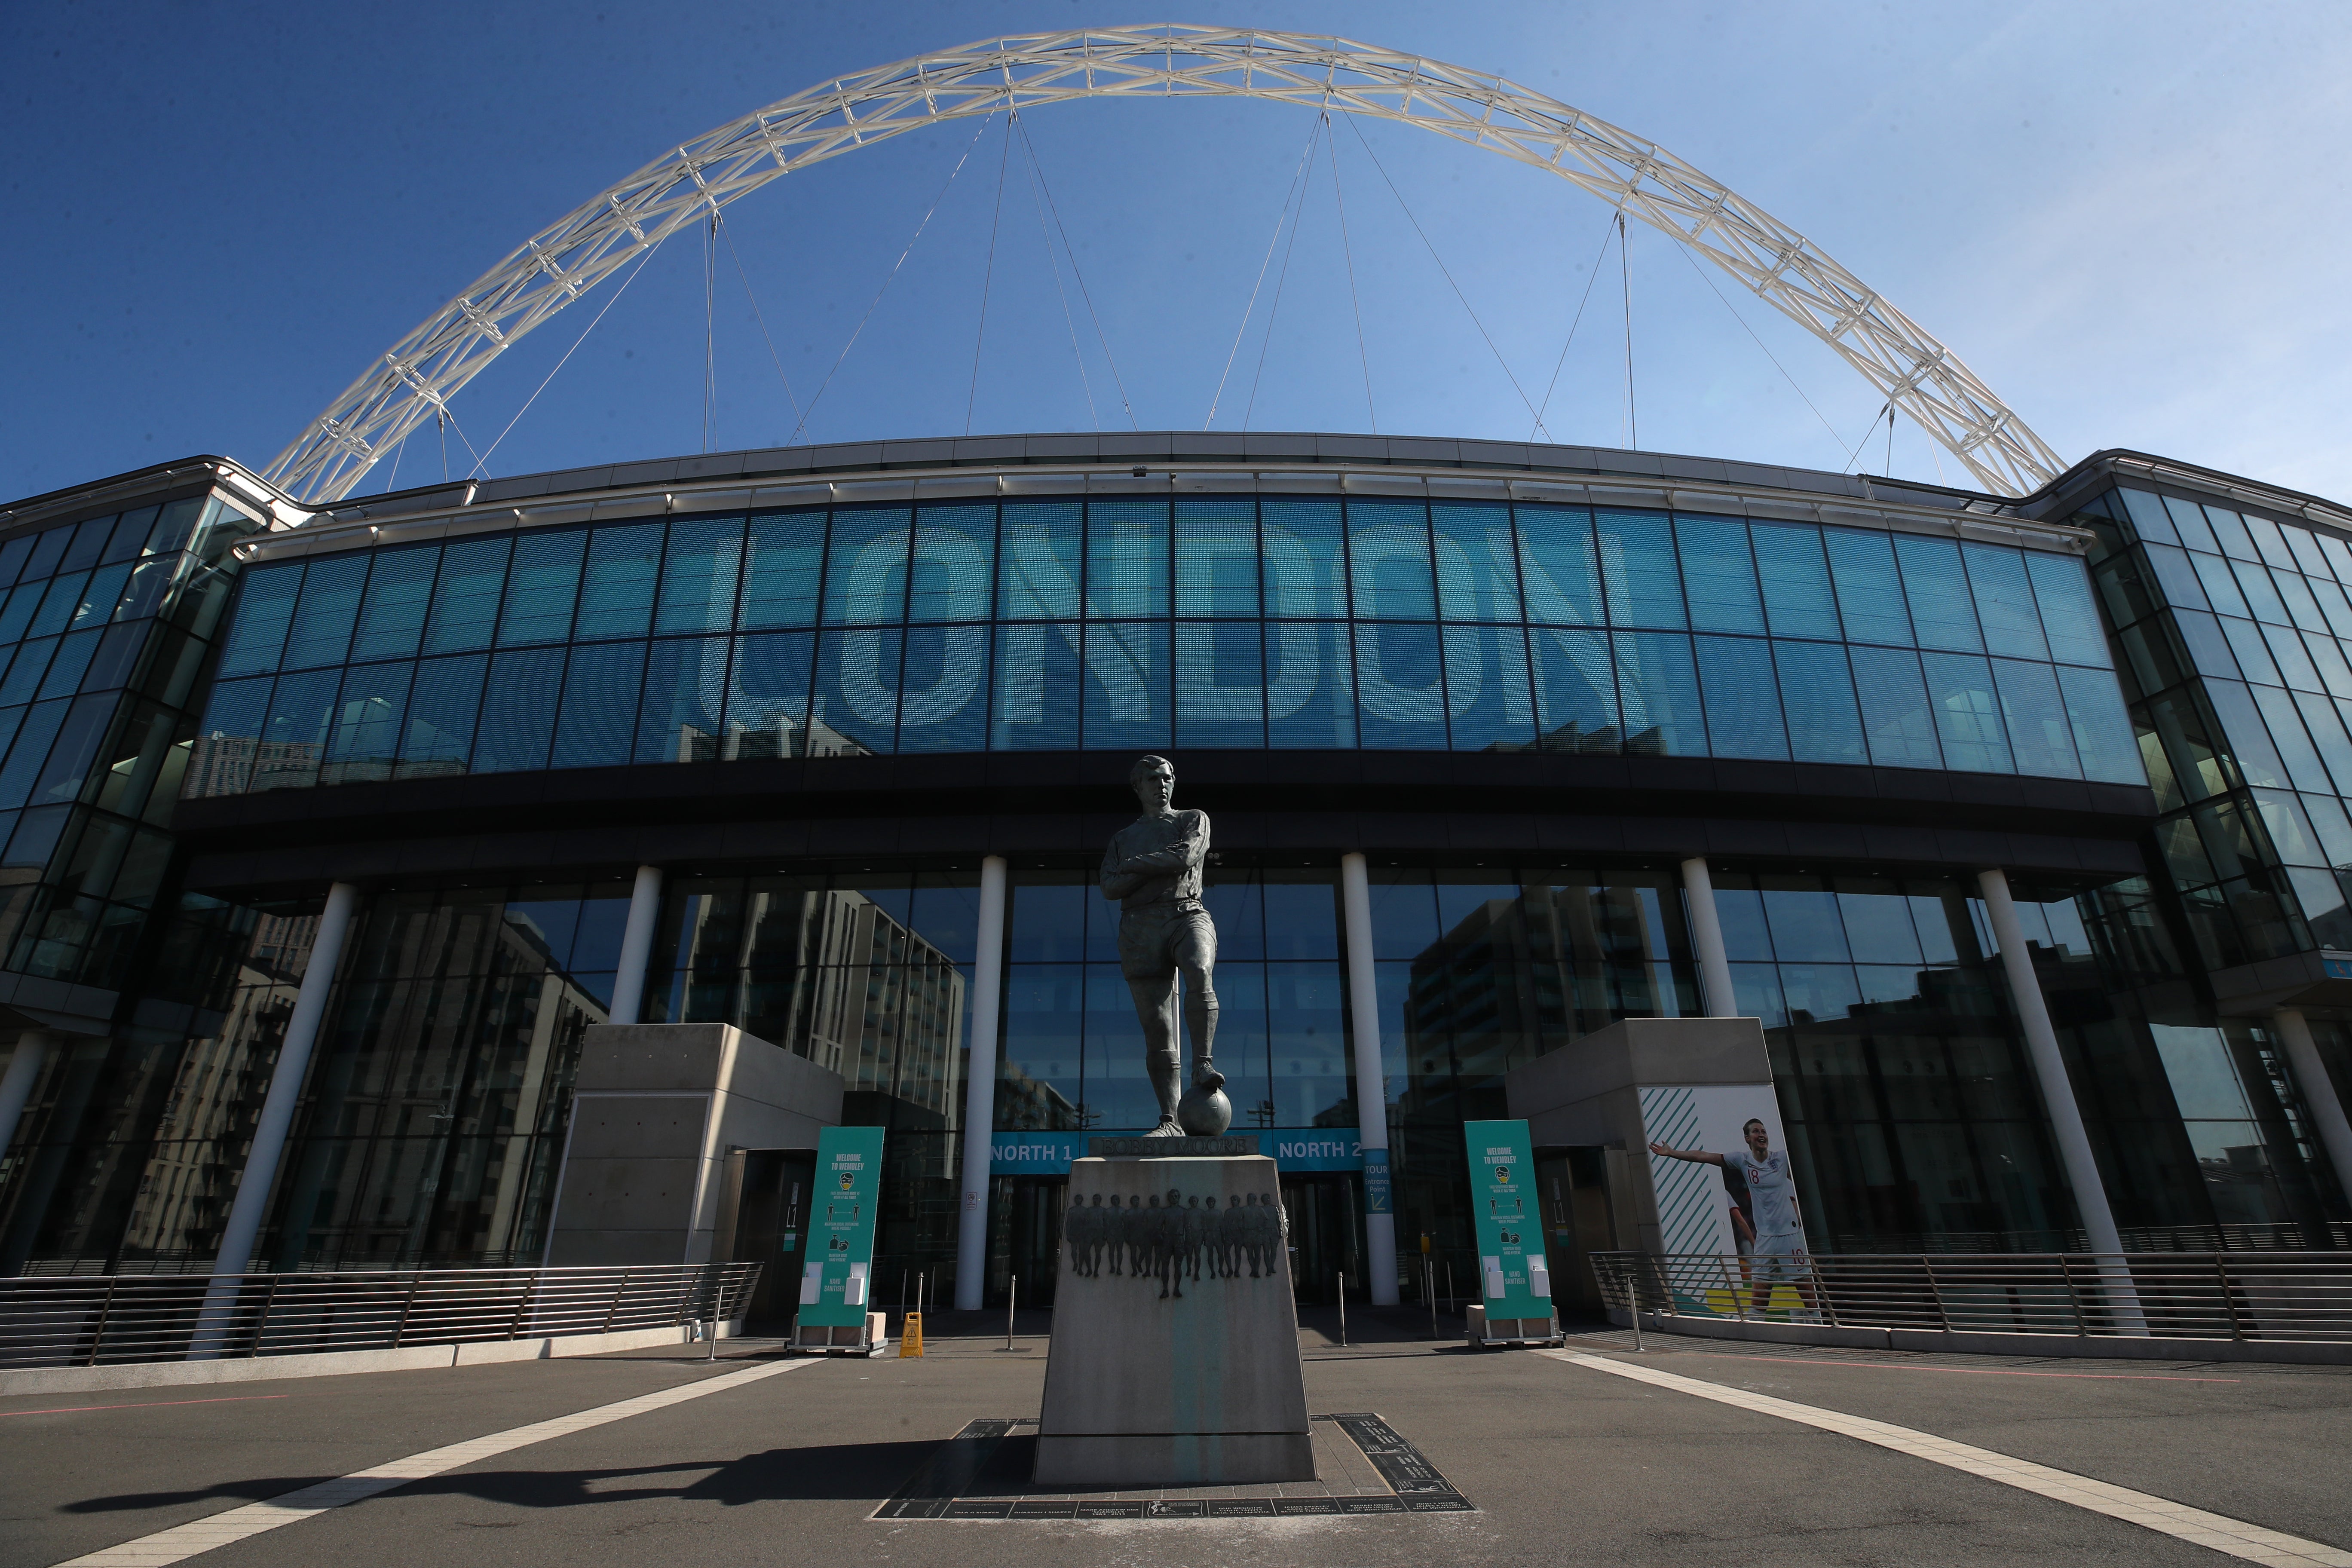 Wembley will stage England's match with Croatia on Sunday